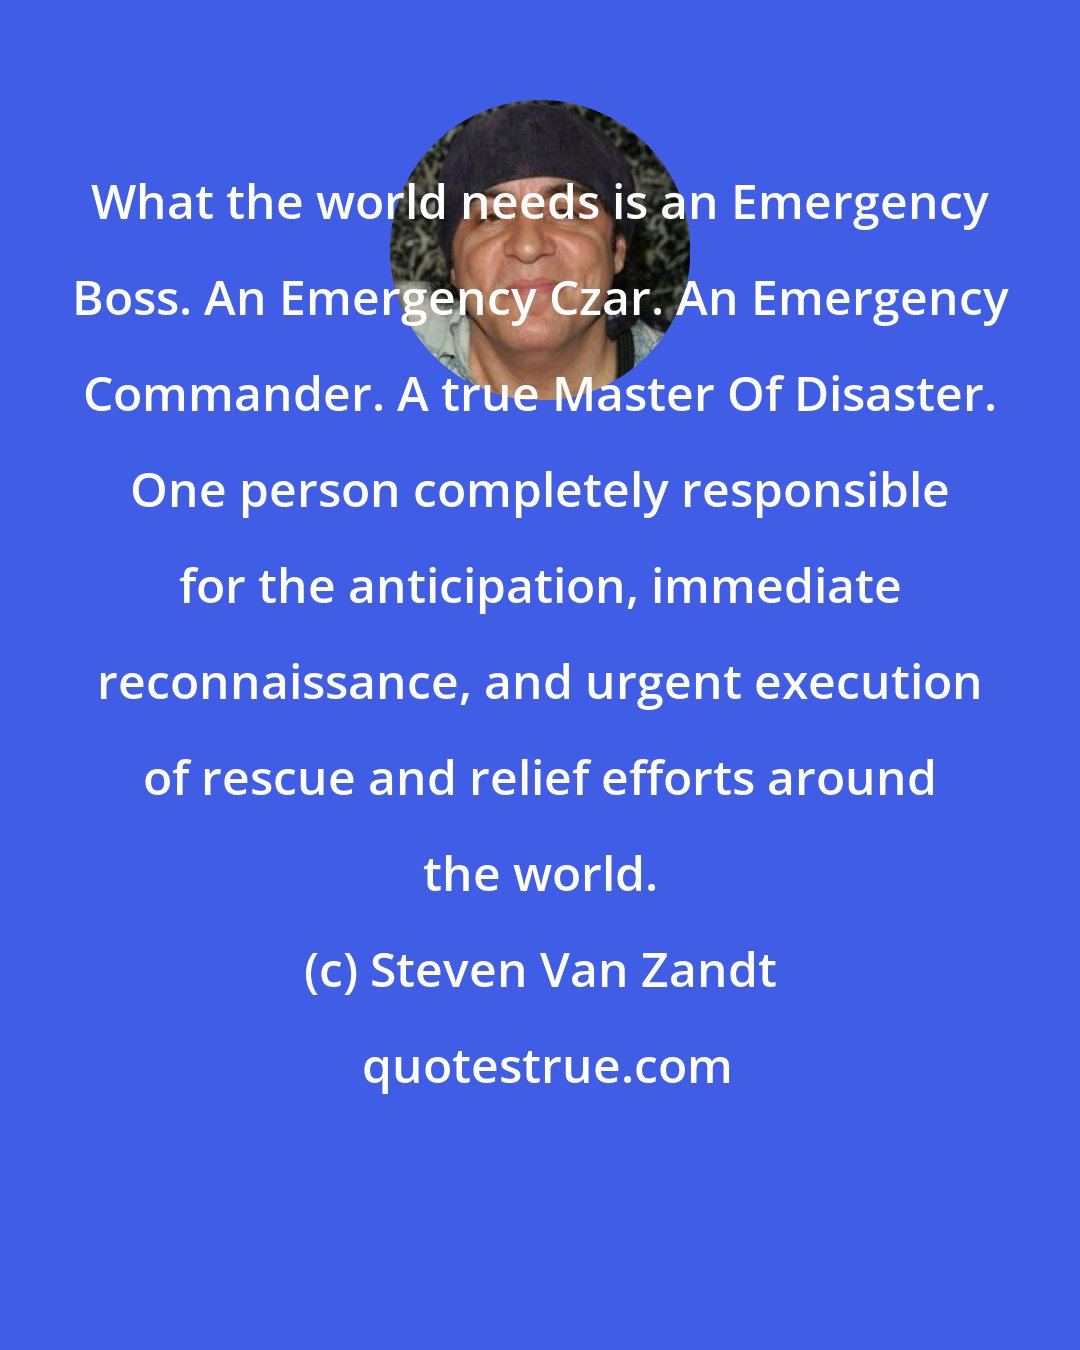 Steven Van Zandt: What the world needs is an Emergency Boss. An Emergency Czar. An Emergency Commander. A true Master Of Disaster. One person completely responsible for the anticipation, immediate reconnaissance, and urgent execution of rescue and relief efforts around the world.